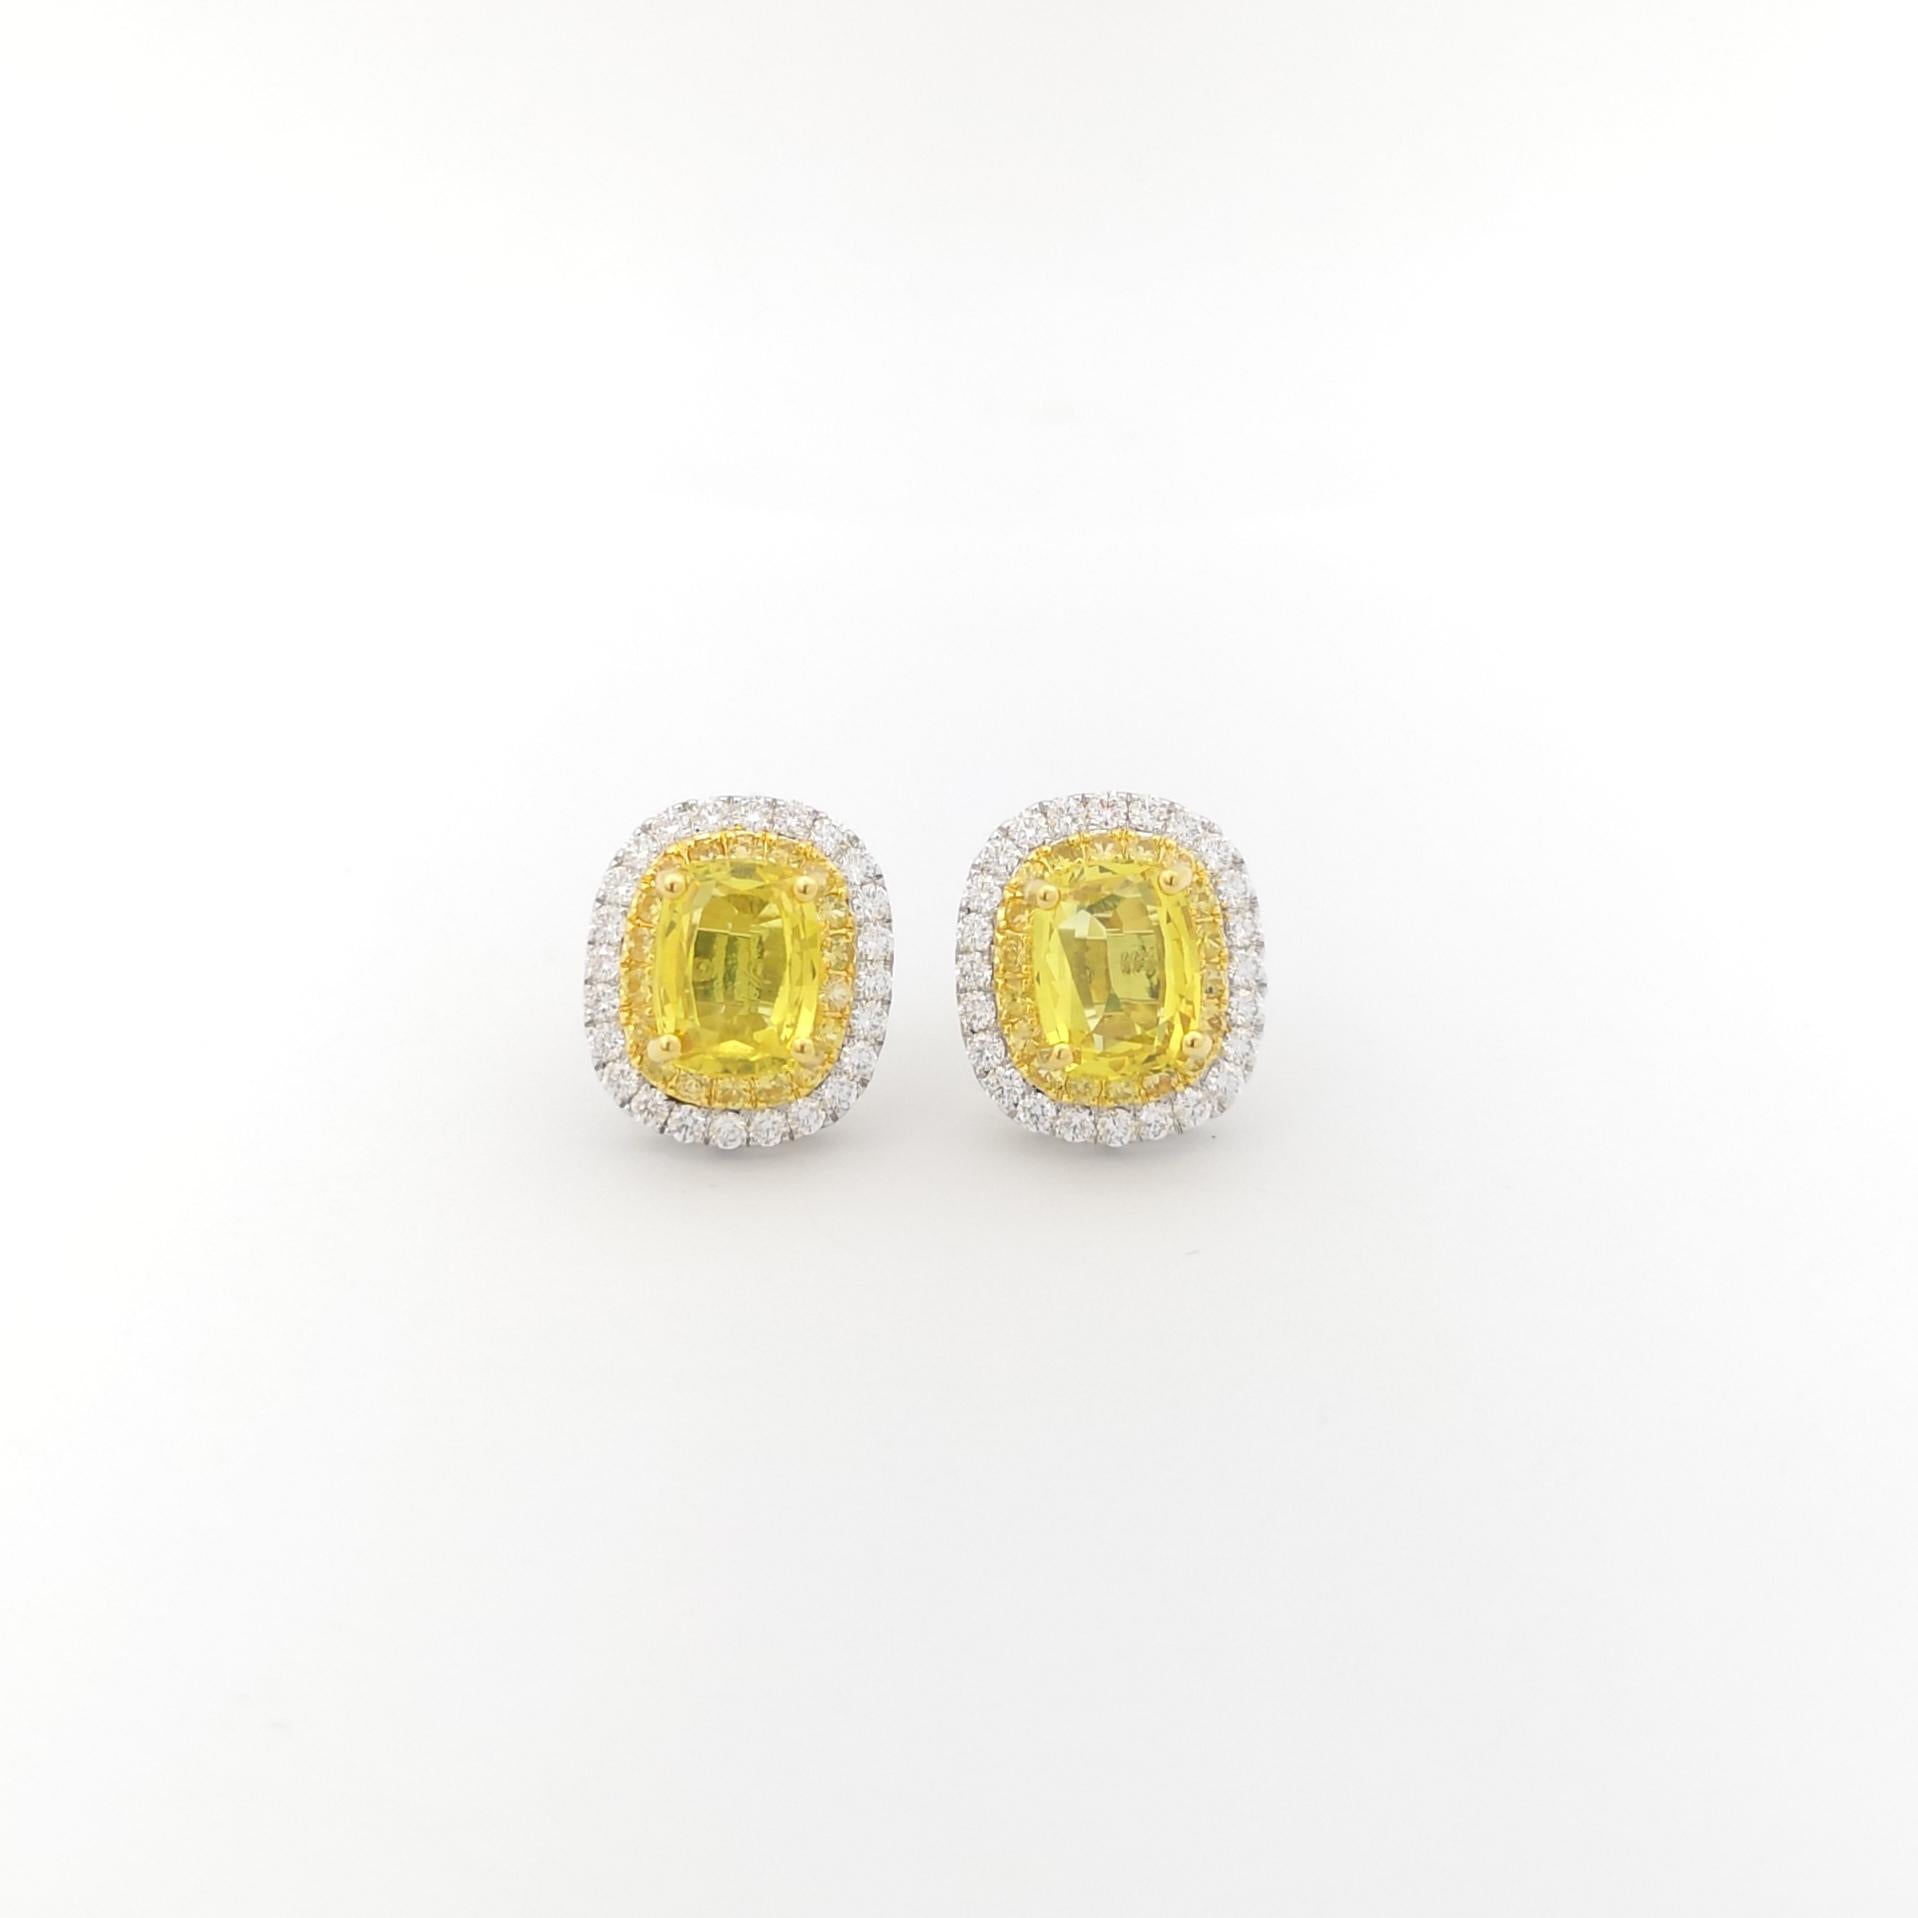 Oval Cut Yellow Sapphire and Diamond Earrings set in 18K Gold/White Gold Settings For Sale